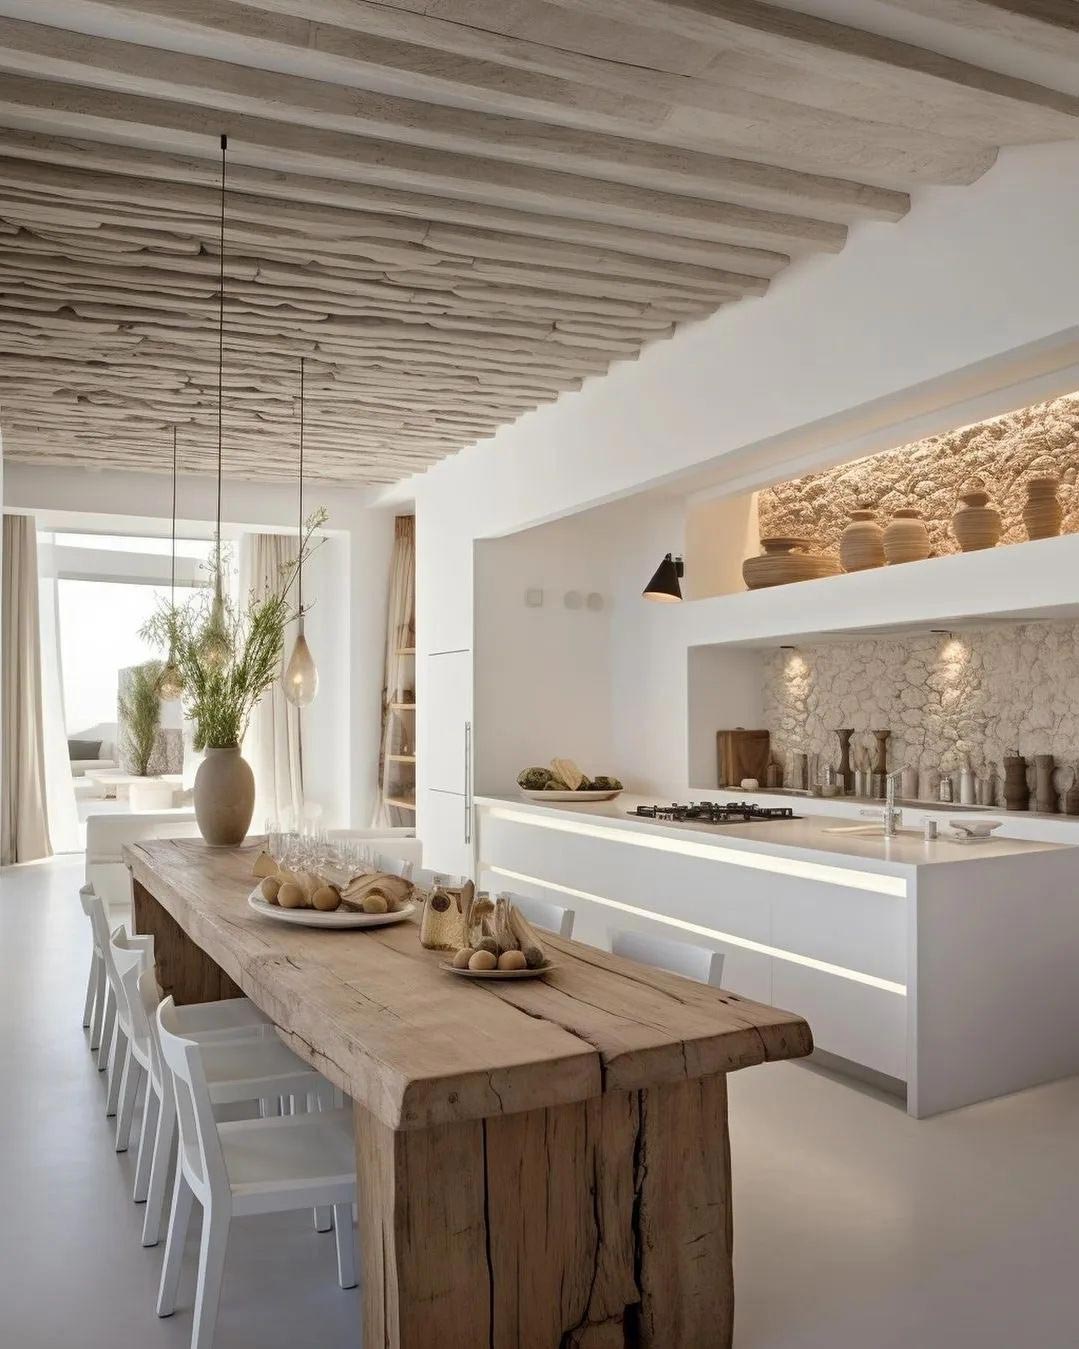 White kitchen design with live edge wood table